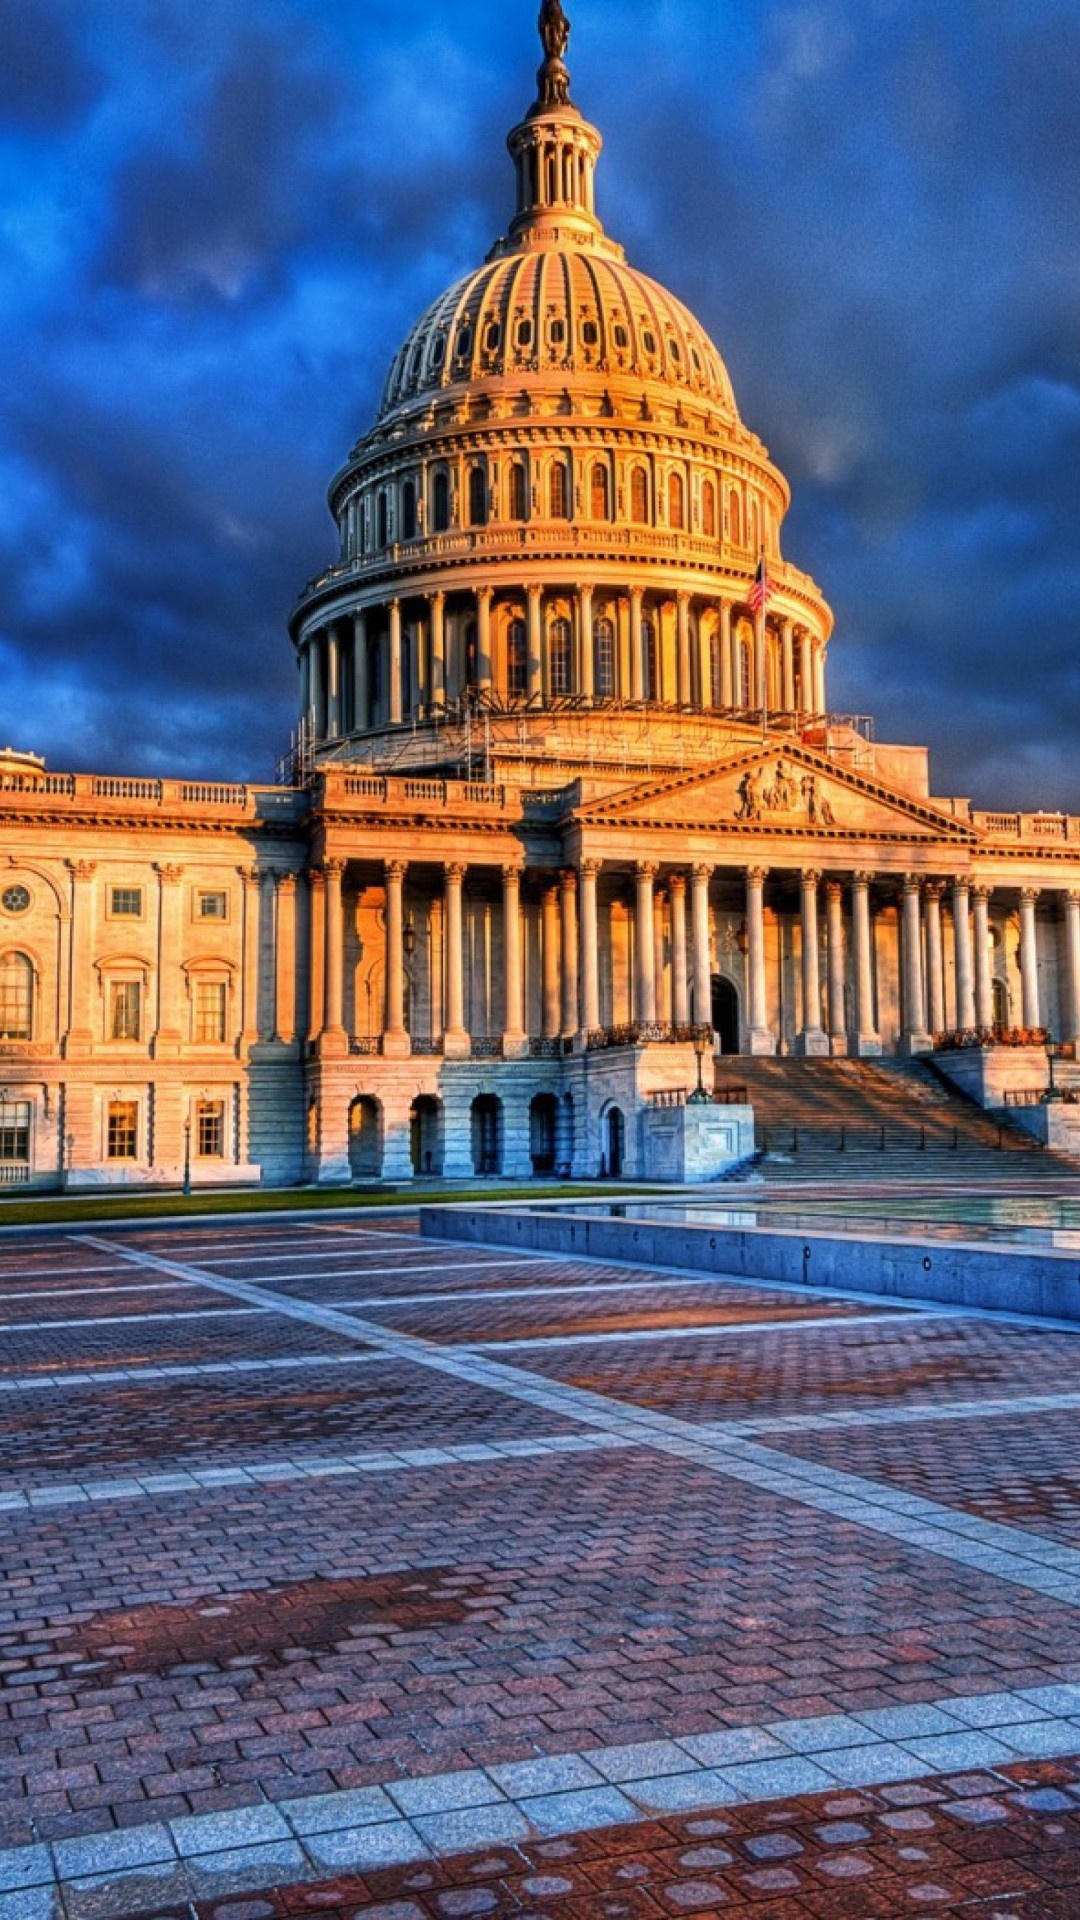 Washington, D.C.: The capital city of the United States, located between Virginia and Maryland on the north bank of the Potomac River. 1080x1920 Full HD Background.